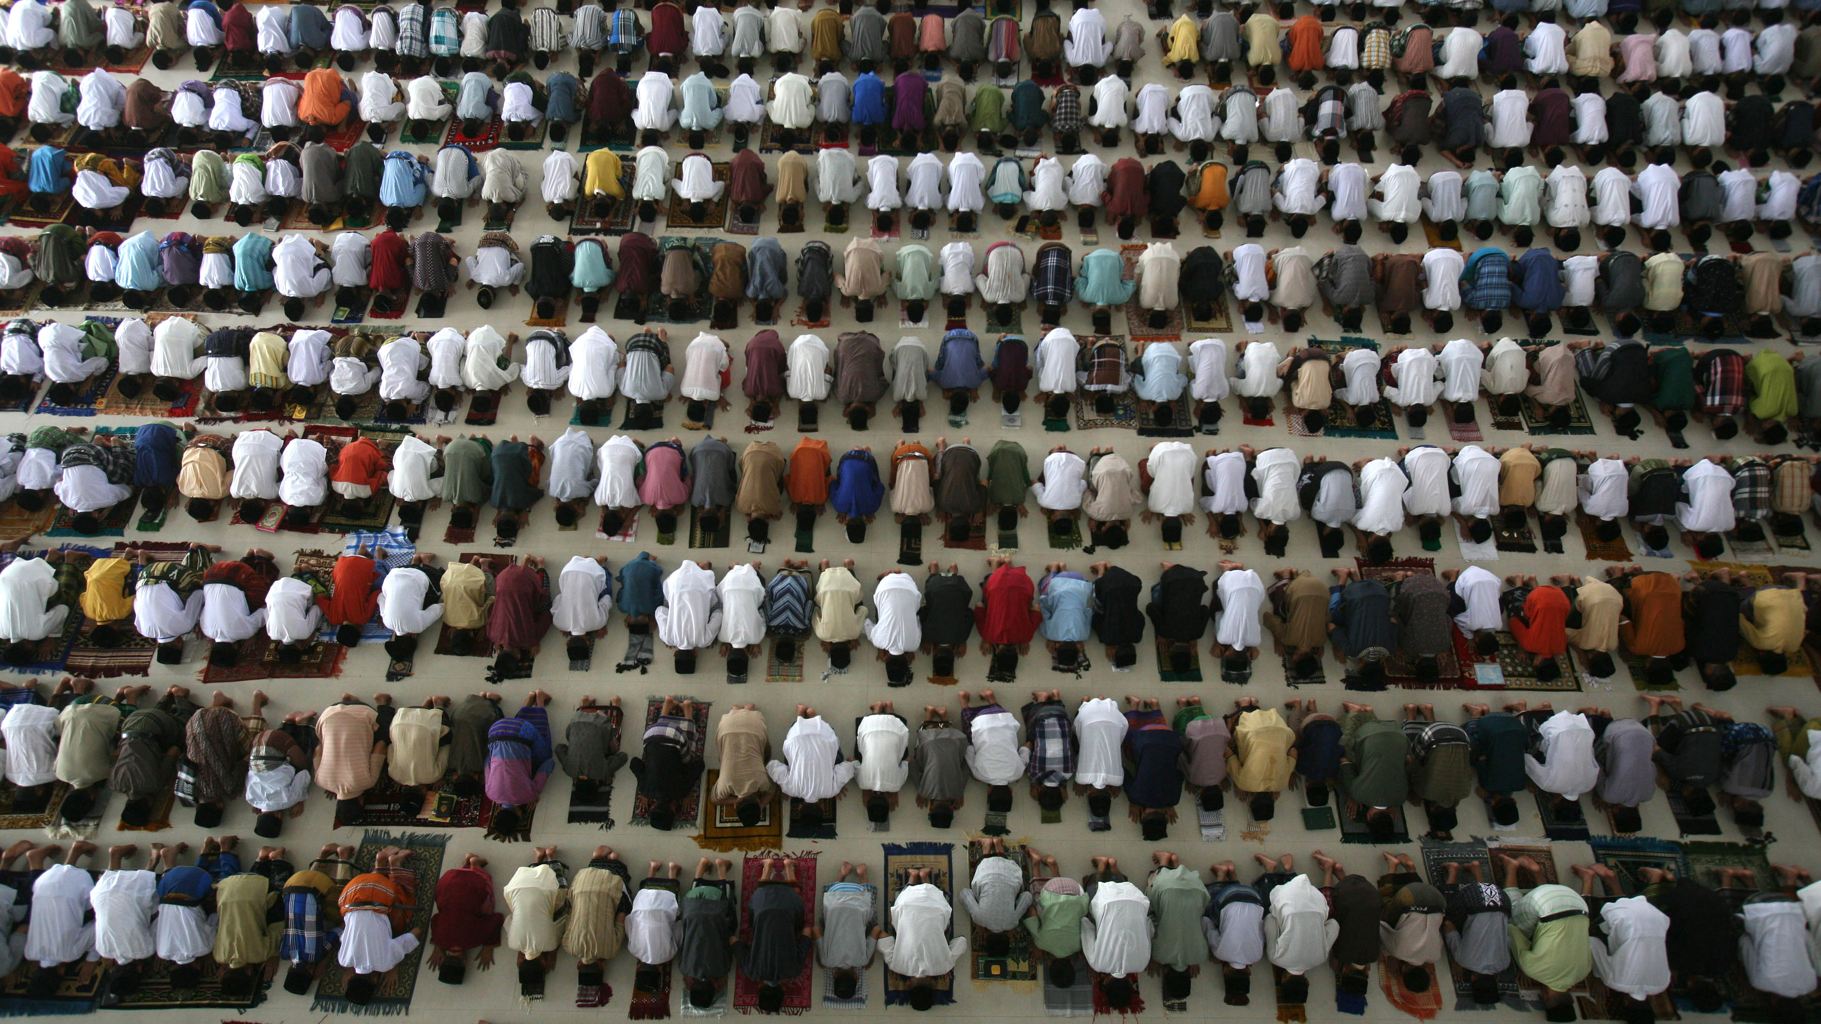 28abd0625b977519580f6a7067000810 1 - In pictures: Ramadhan 2014 around the world